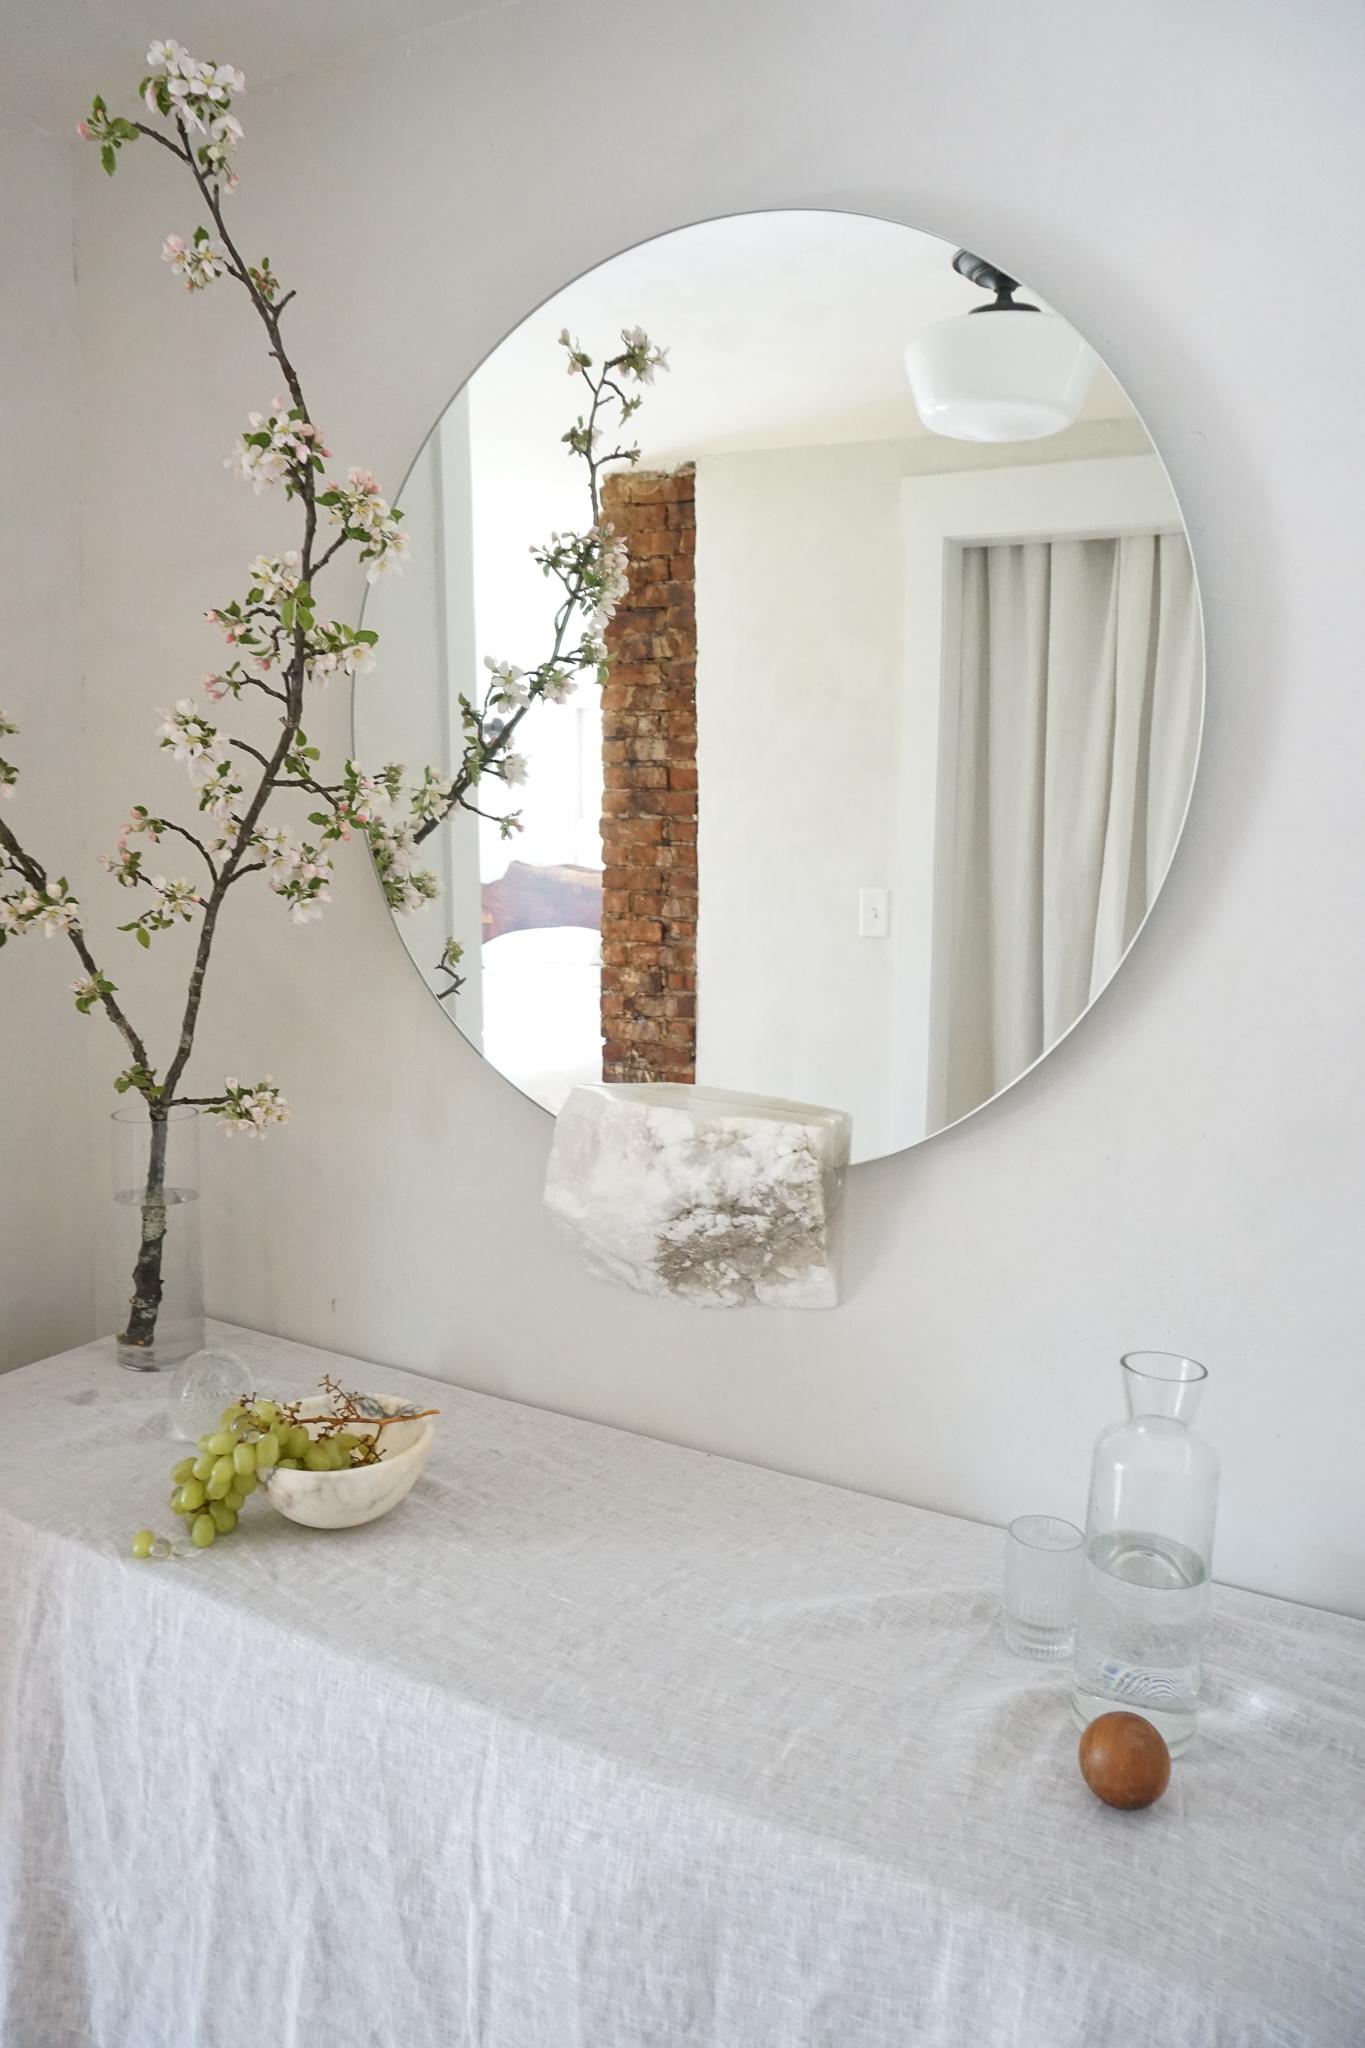 Ridge mirror by Swell Studio
Dimensions: Mirror: D82 cm. Stone: D 11 x W 81 x H 21 cm 
Material: Alabaster, (mirror available in smoke, bronze, antiqued & peach)


A round wall mirror, supported by a white alabaster cut off rests in contoured